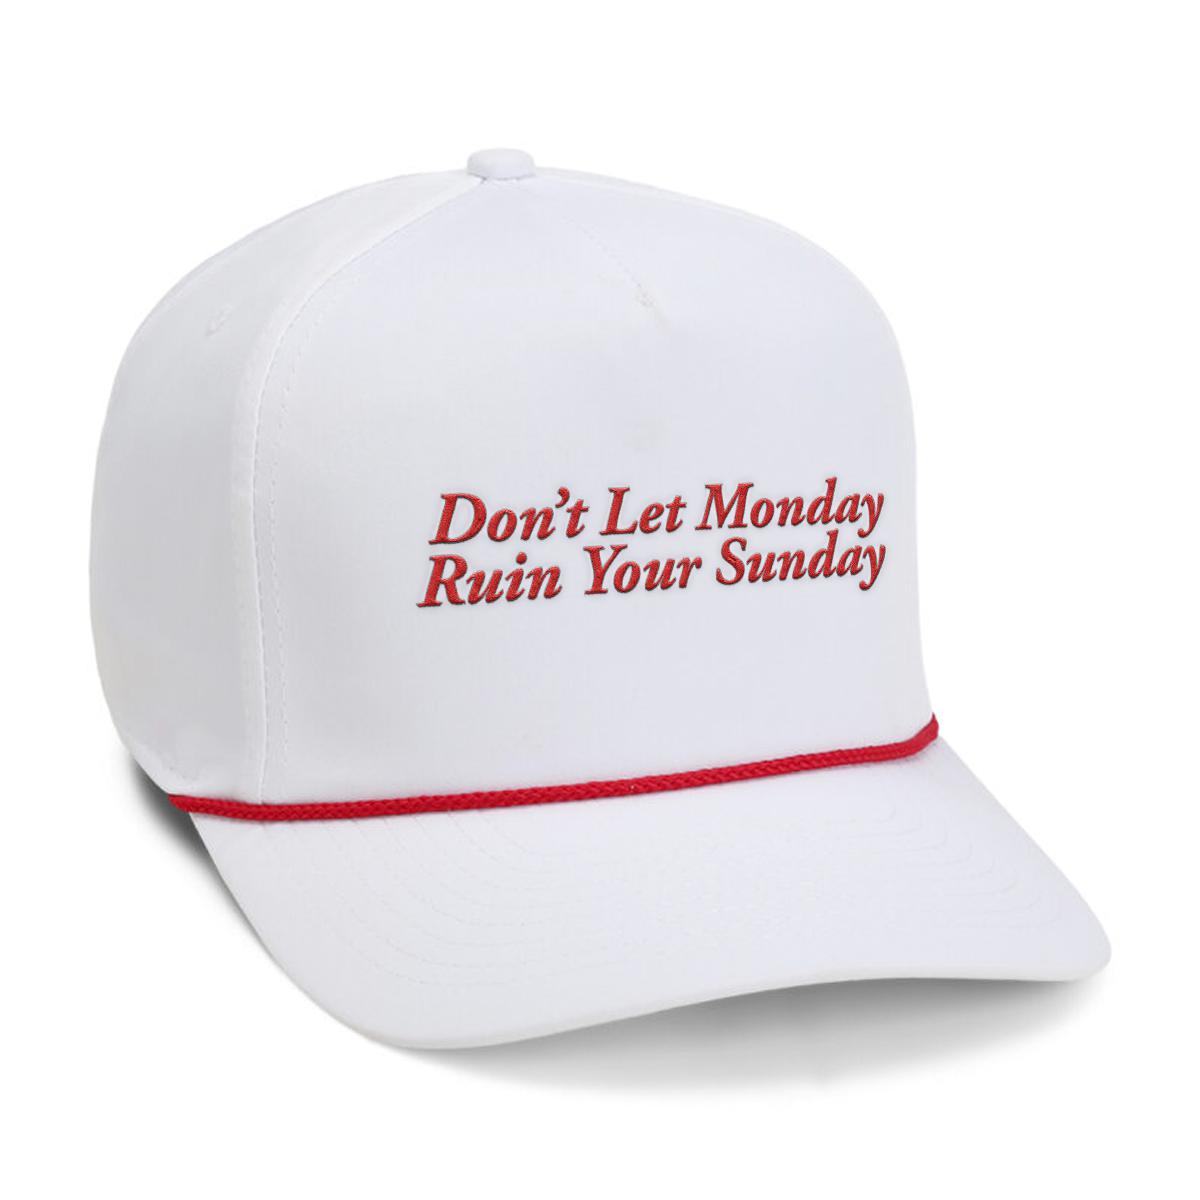 Don't Let Monday Imperial Rope Hat-Hats-Barstool Sports-White-One Size-Barstool Sports